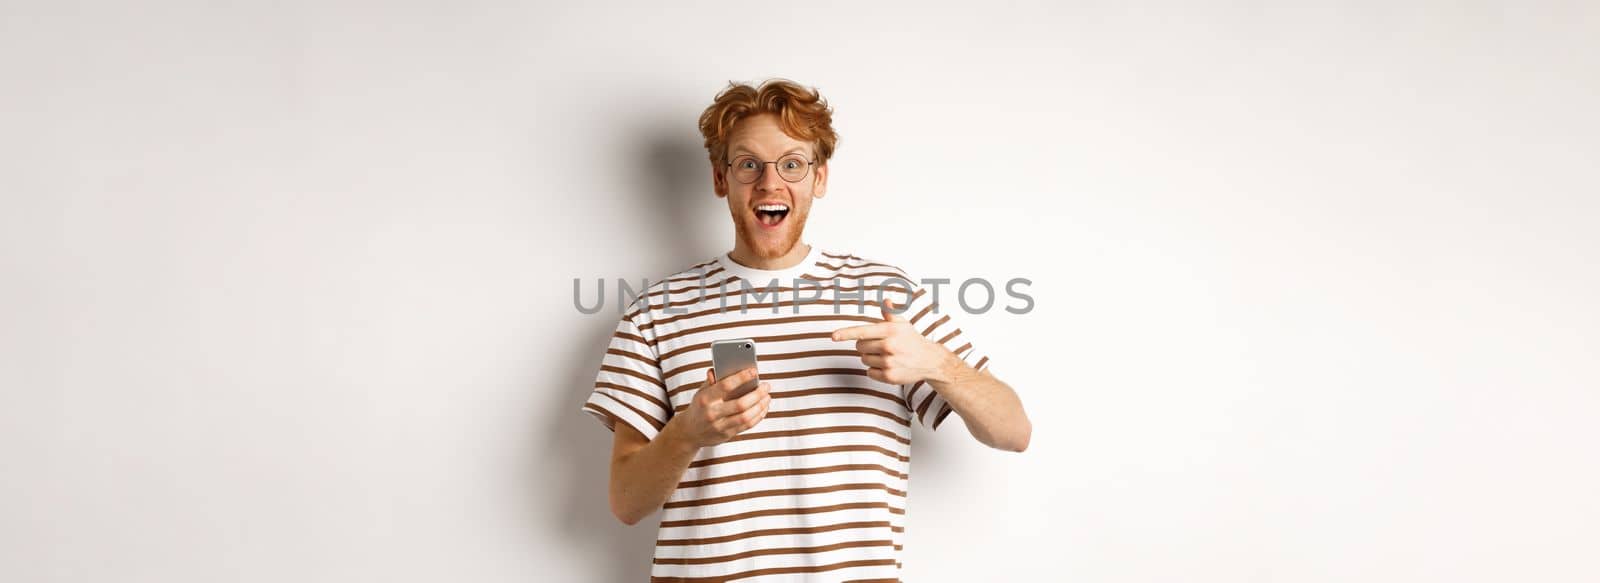 Technology and e-commerce concept. Amazed redhead man checking out online promo offer on mobile phone, pointing finger at smartphone and smiling, white background.